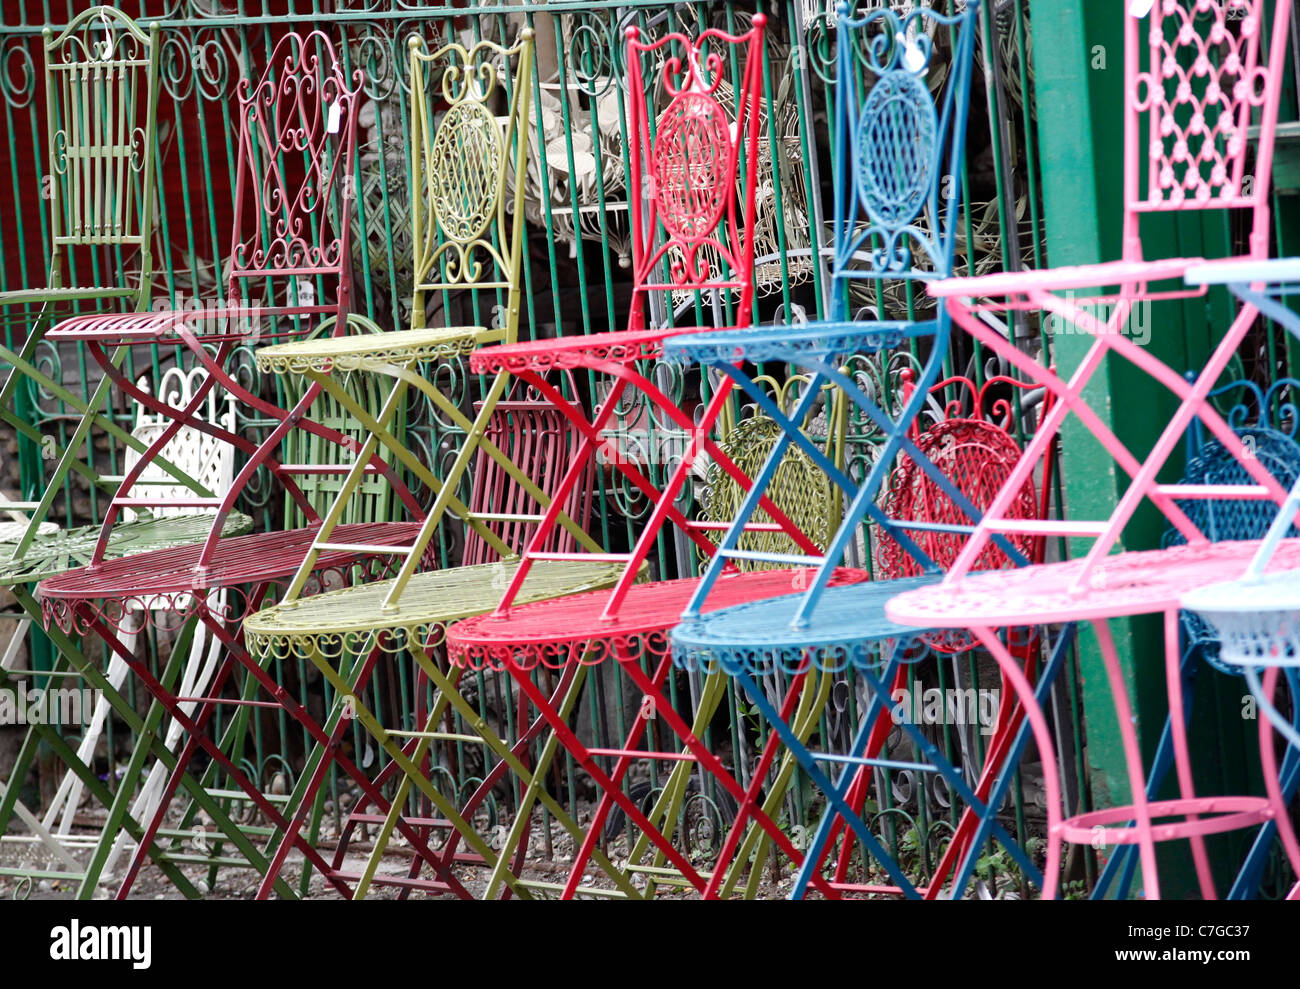 vintage iron chairs on display in a shop front Stock Photo